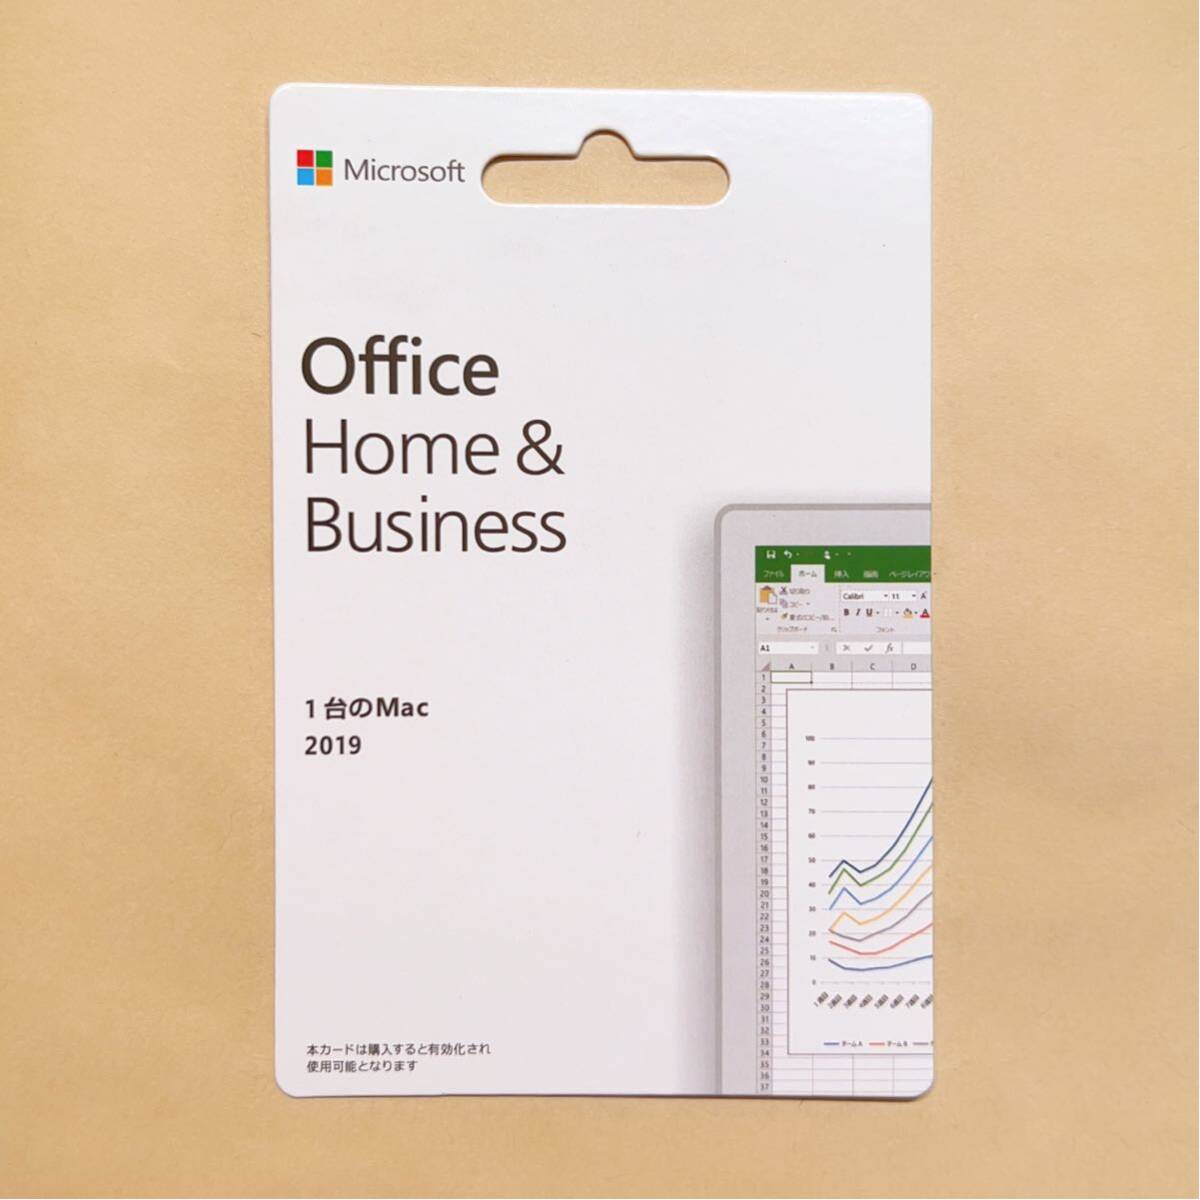 Microsoft Office Home and Business 2019 for Mac 永続版カード 実物発送 正規未開封 の画像1